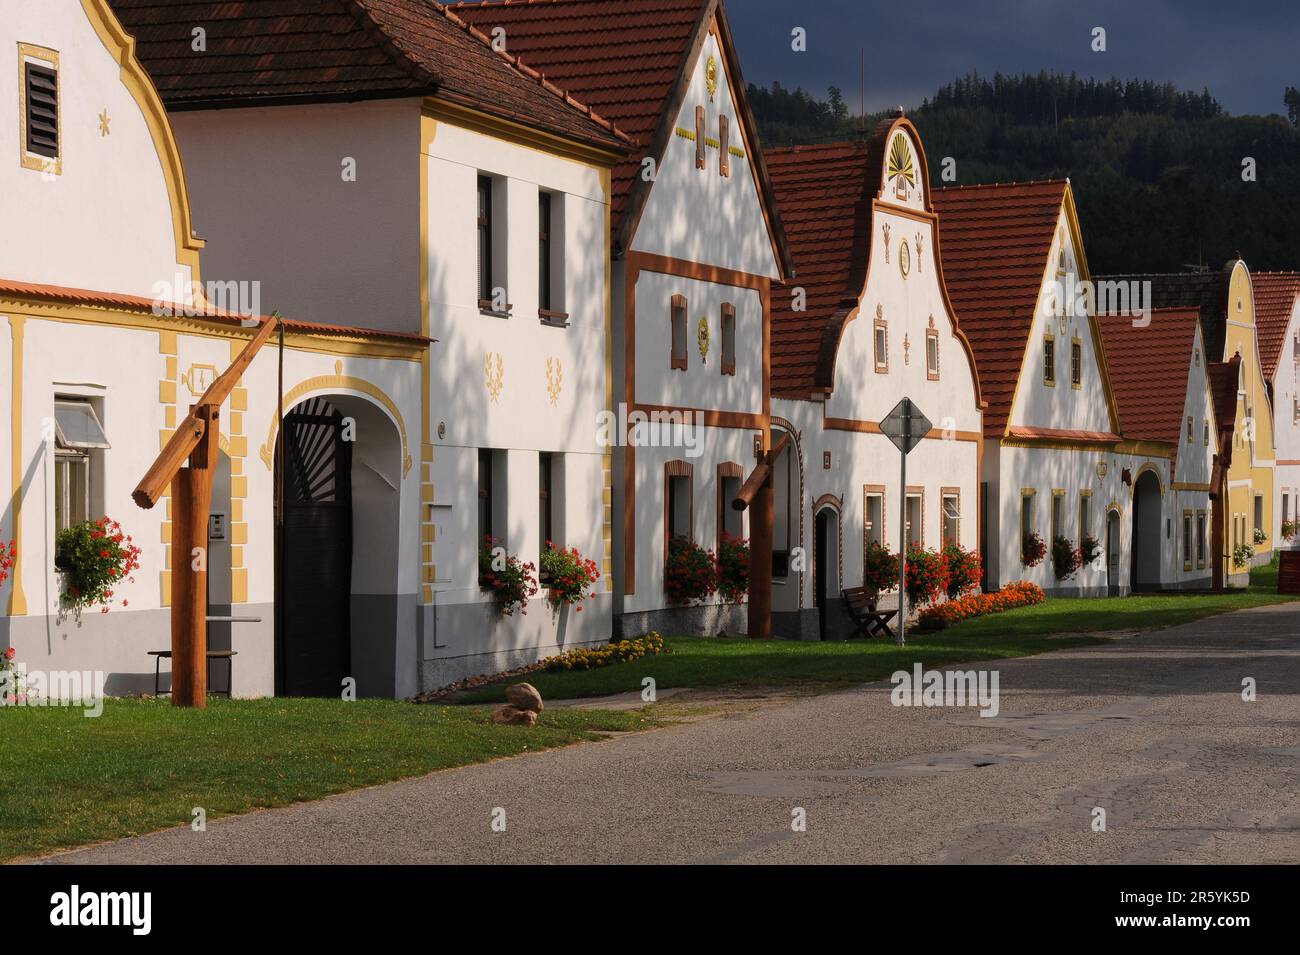 Houses in historic village of Holašovice, South Bohemia, Czechia or Czech Republic. Holašovice is a well-preserved example of a traditional Central European village with many houses rebuilt in the 1800s AD in a style known as South Bohemian Folk Baroque, Rural Baroque or Rustic Baroque.   In 1997 the village was included in the UNESCO World Cultural Heritage List. Stock Photo